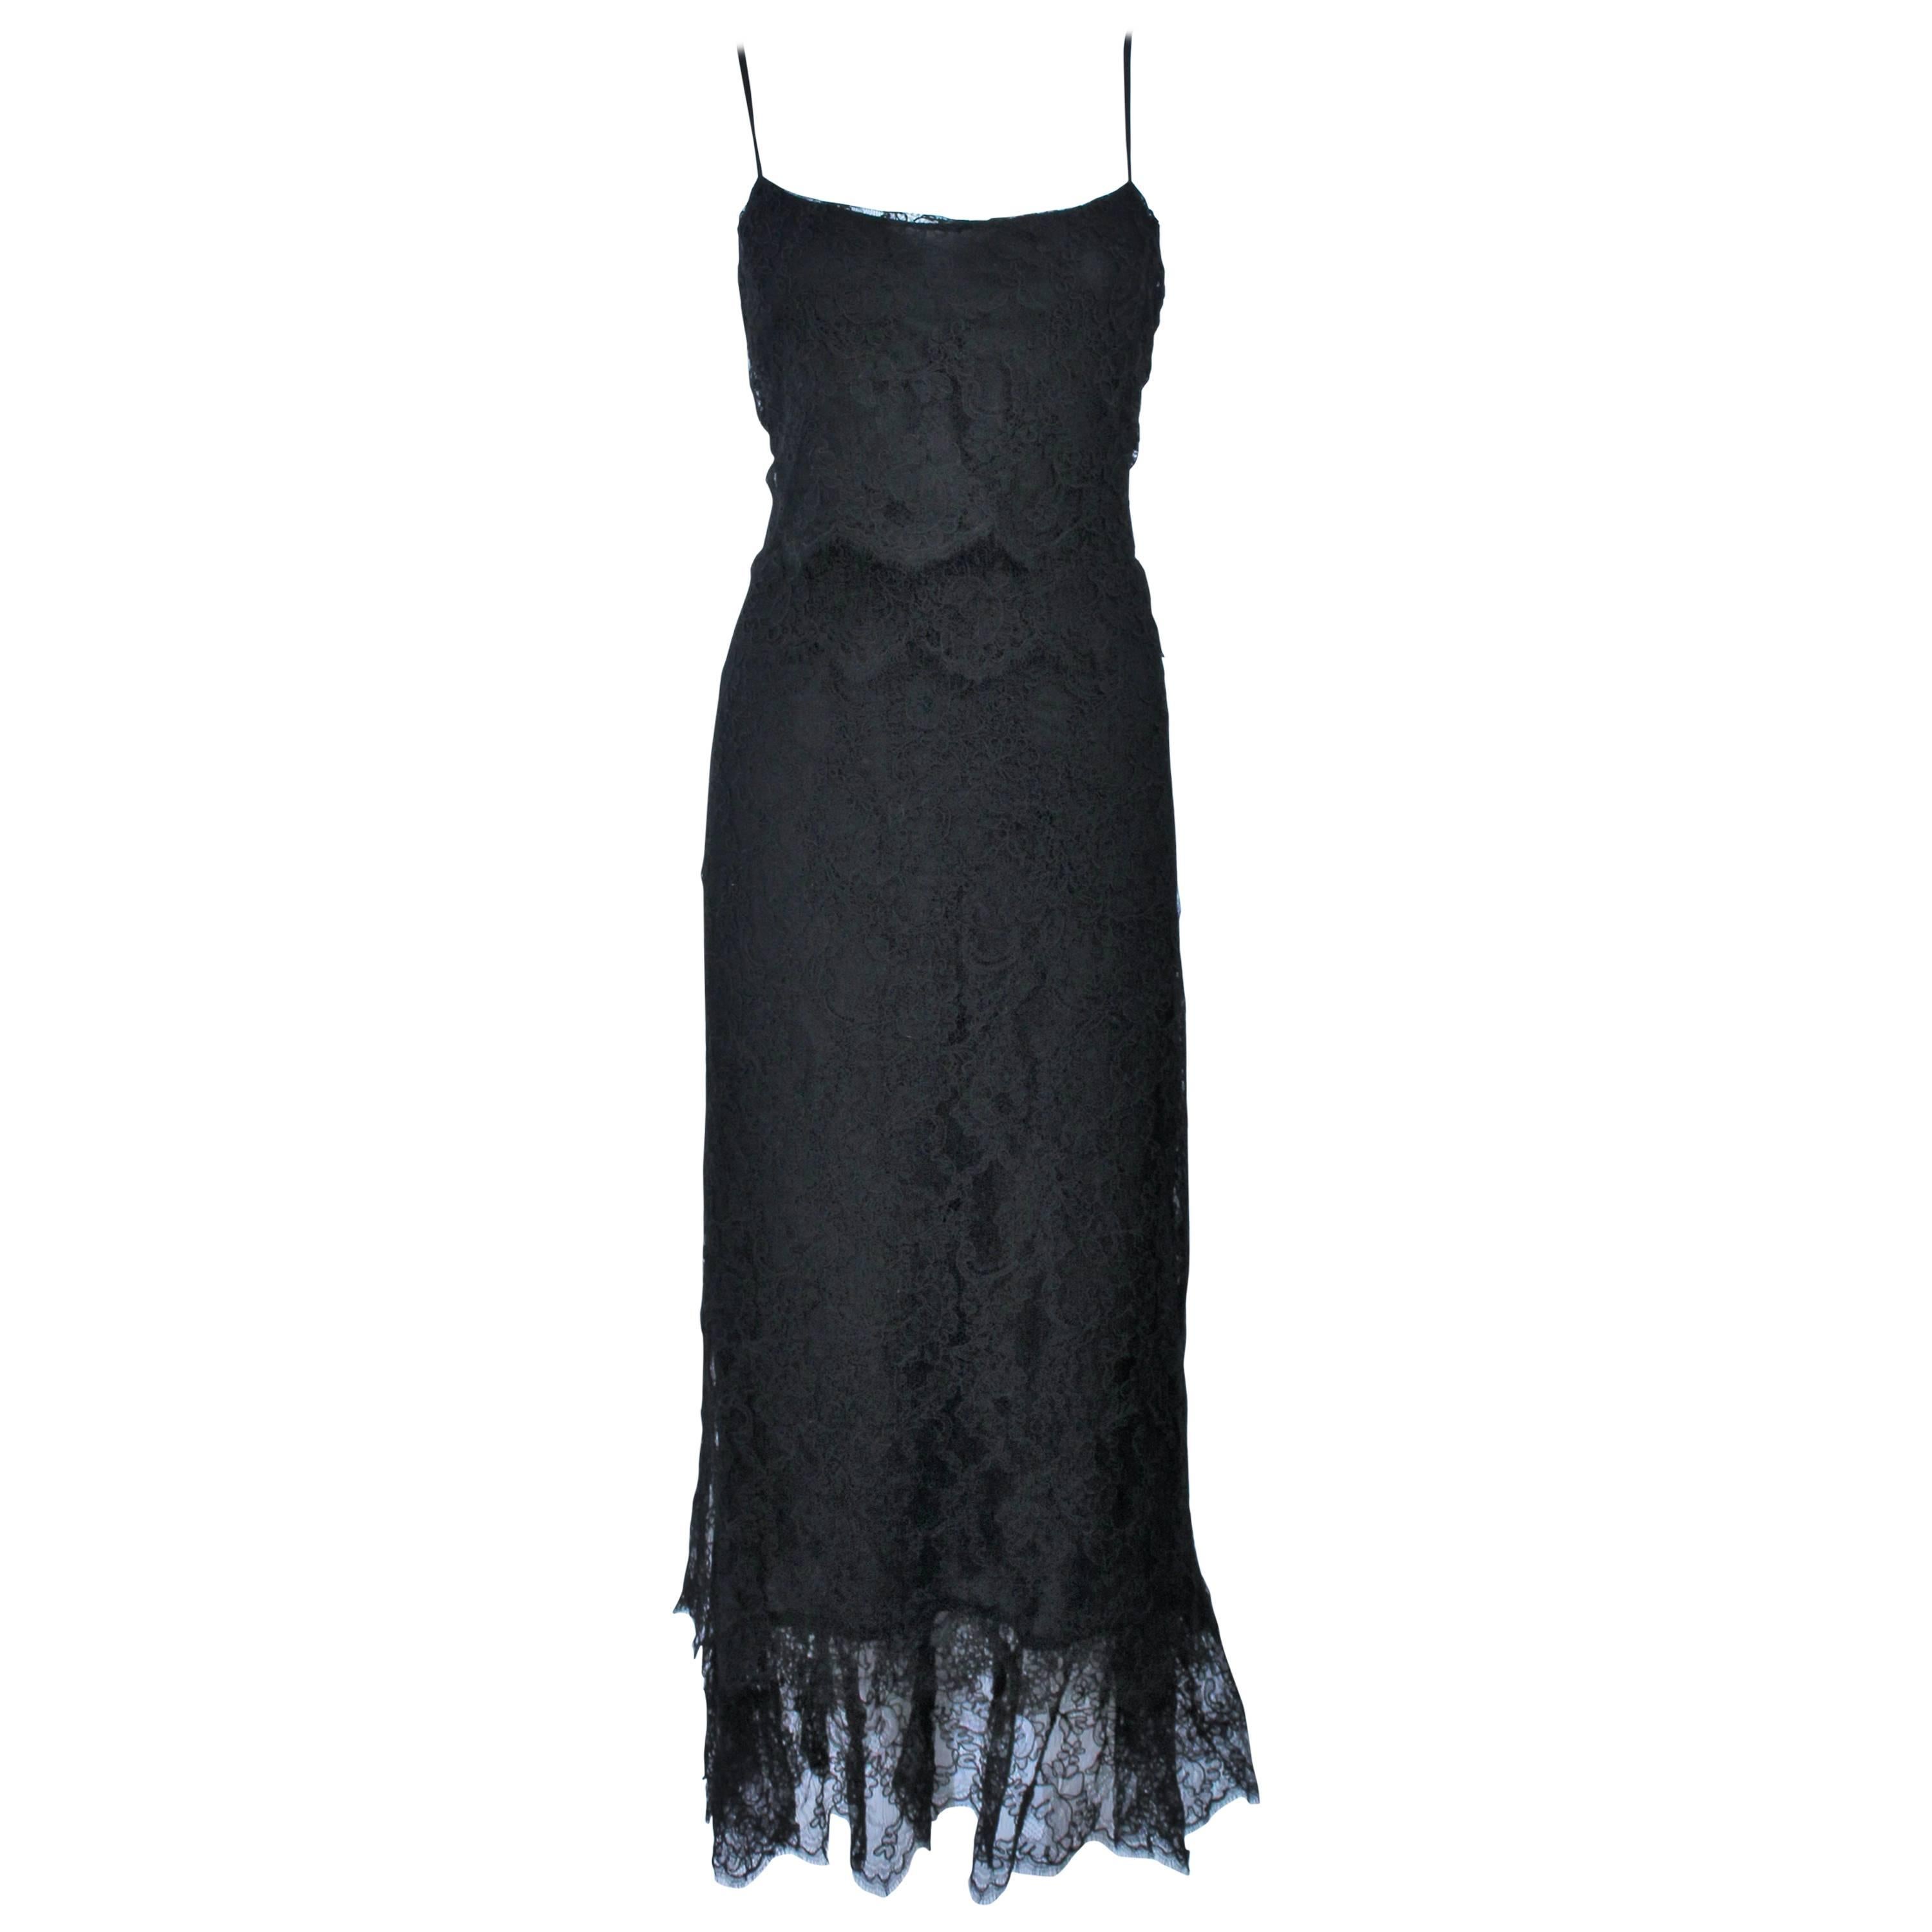 CHANEL Black Tiered Lace Dress Size 10